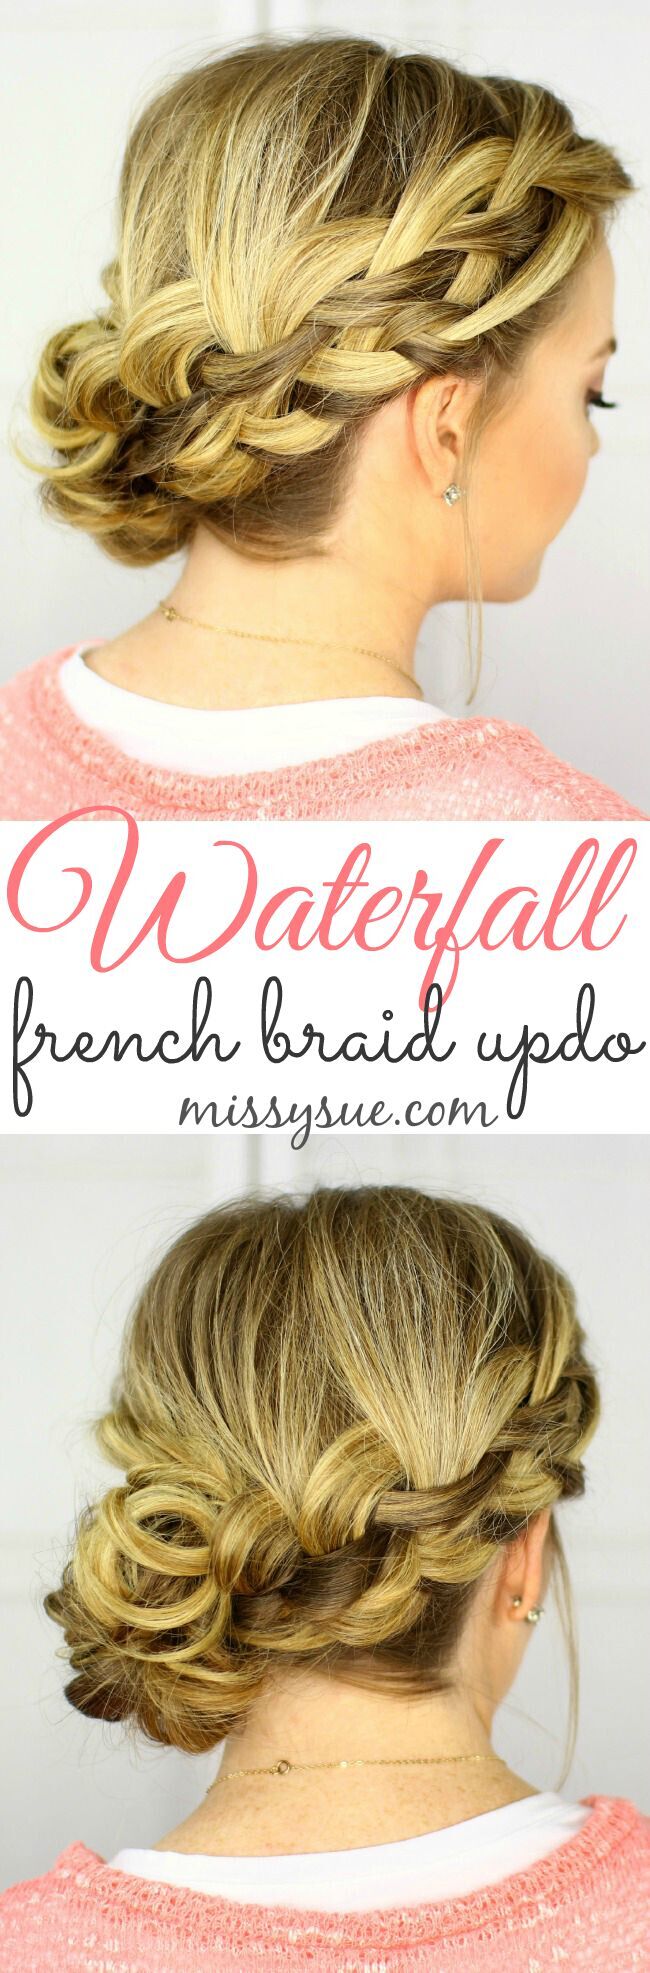 Low, Side Updo Hairstyles - Waterfall French Braid Updo